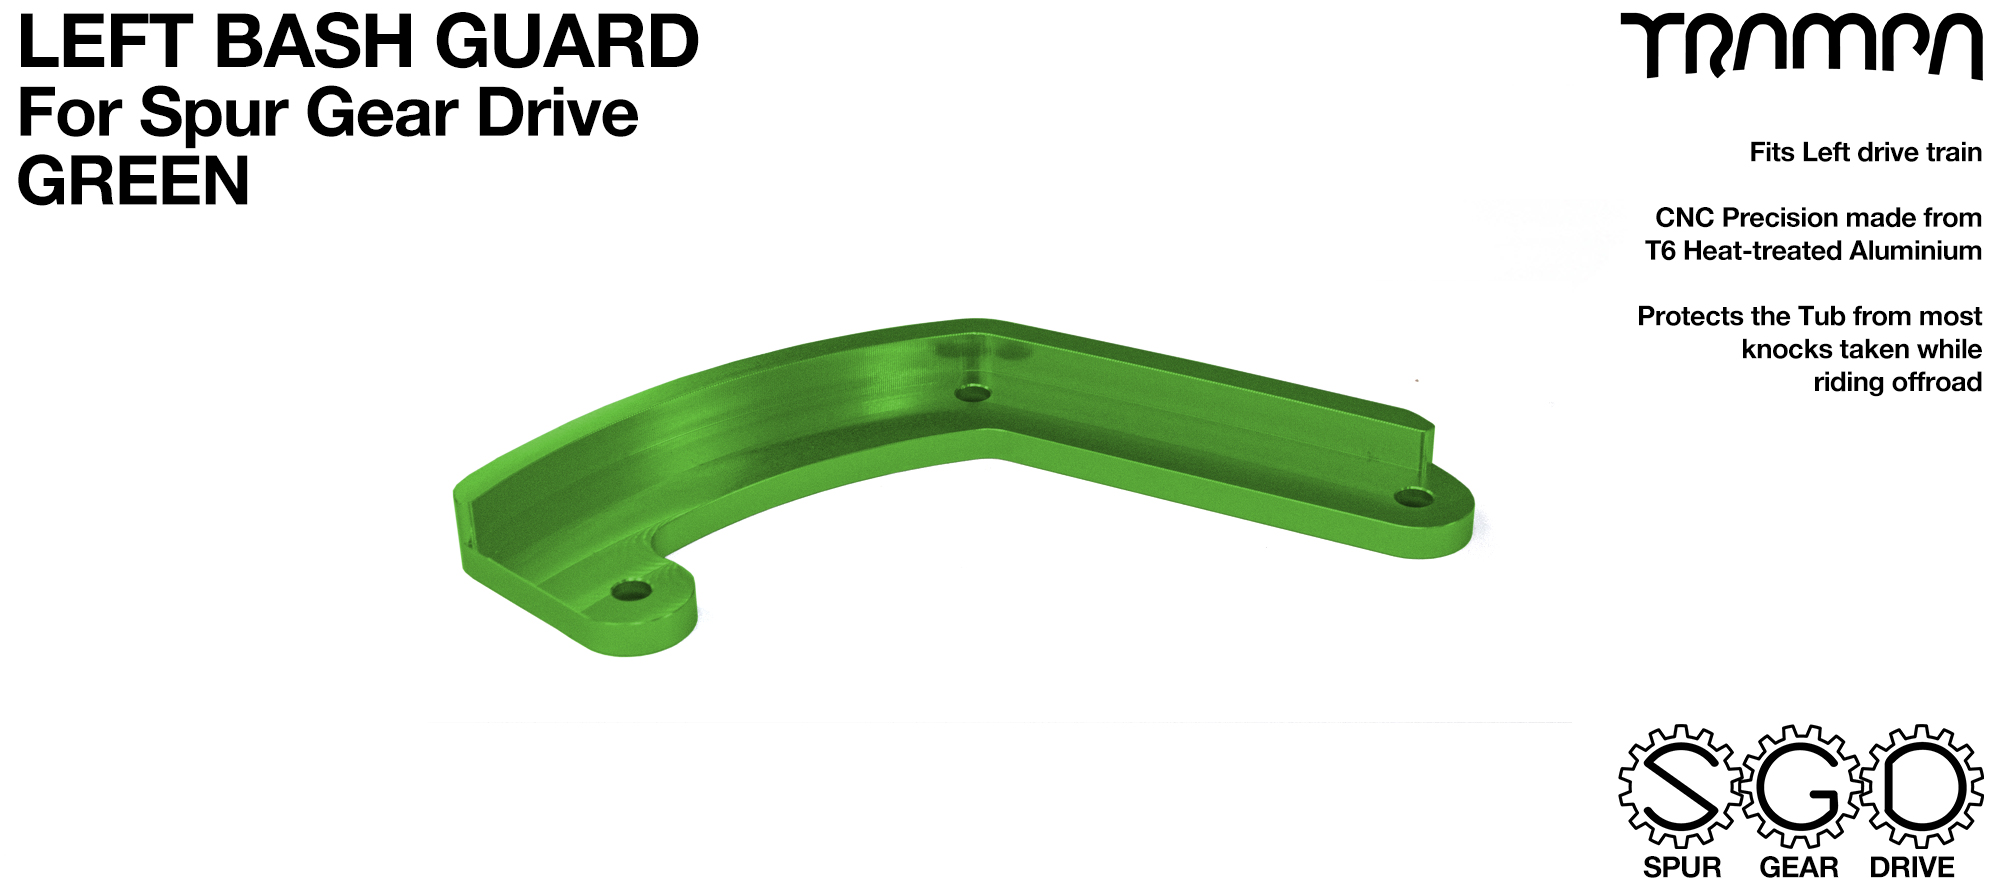 MkII Spur Gear Drive Bash Guard - LEFT Side - GREEN